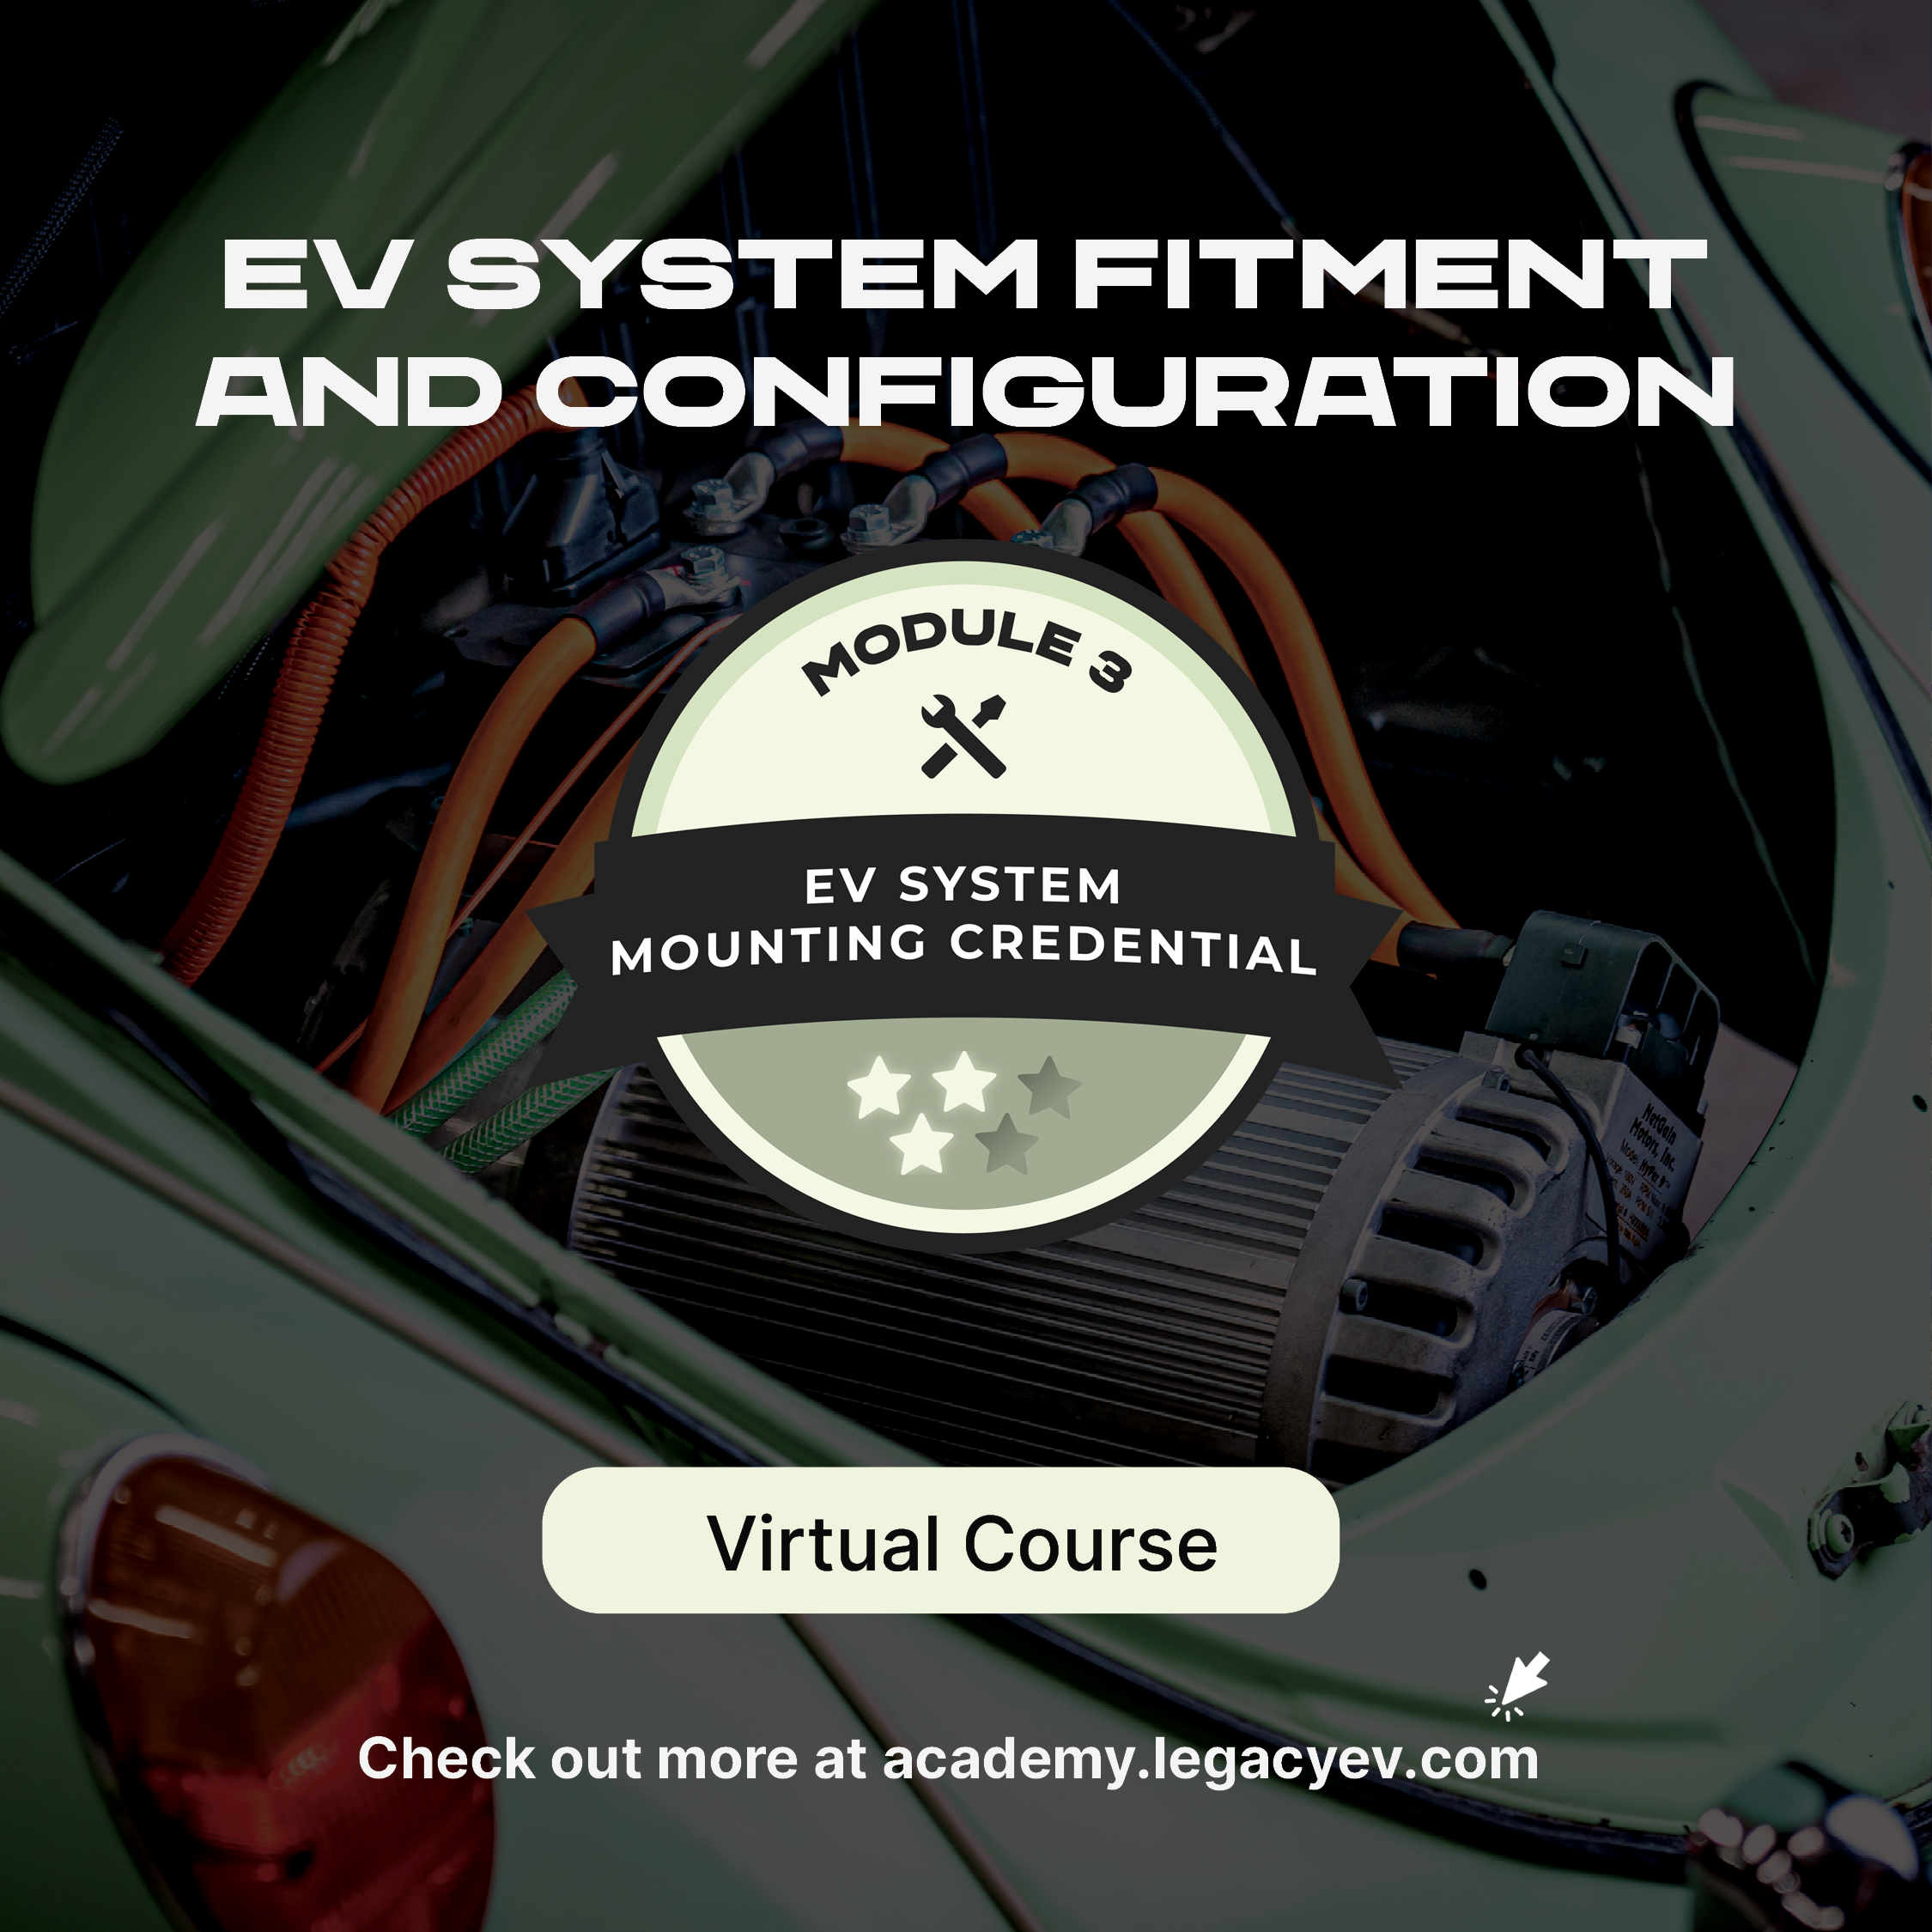 EV System Fitment and Configuration Virtual Course